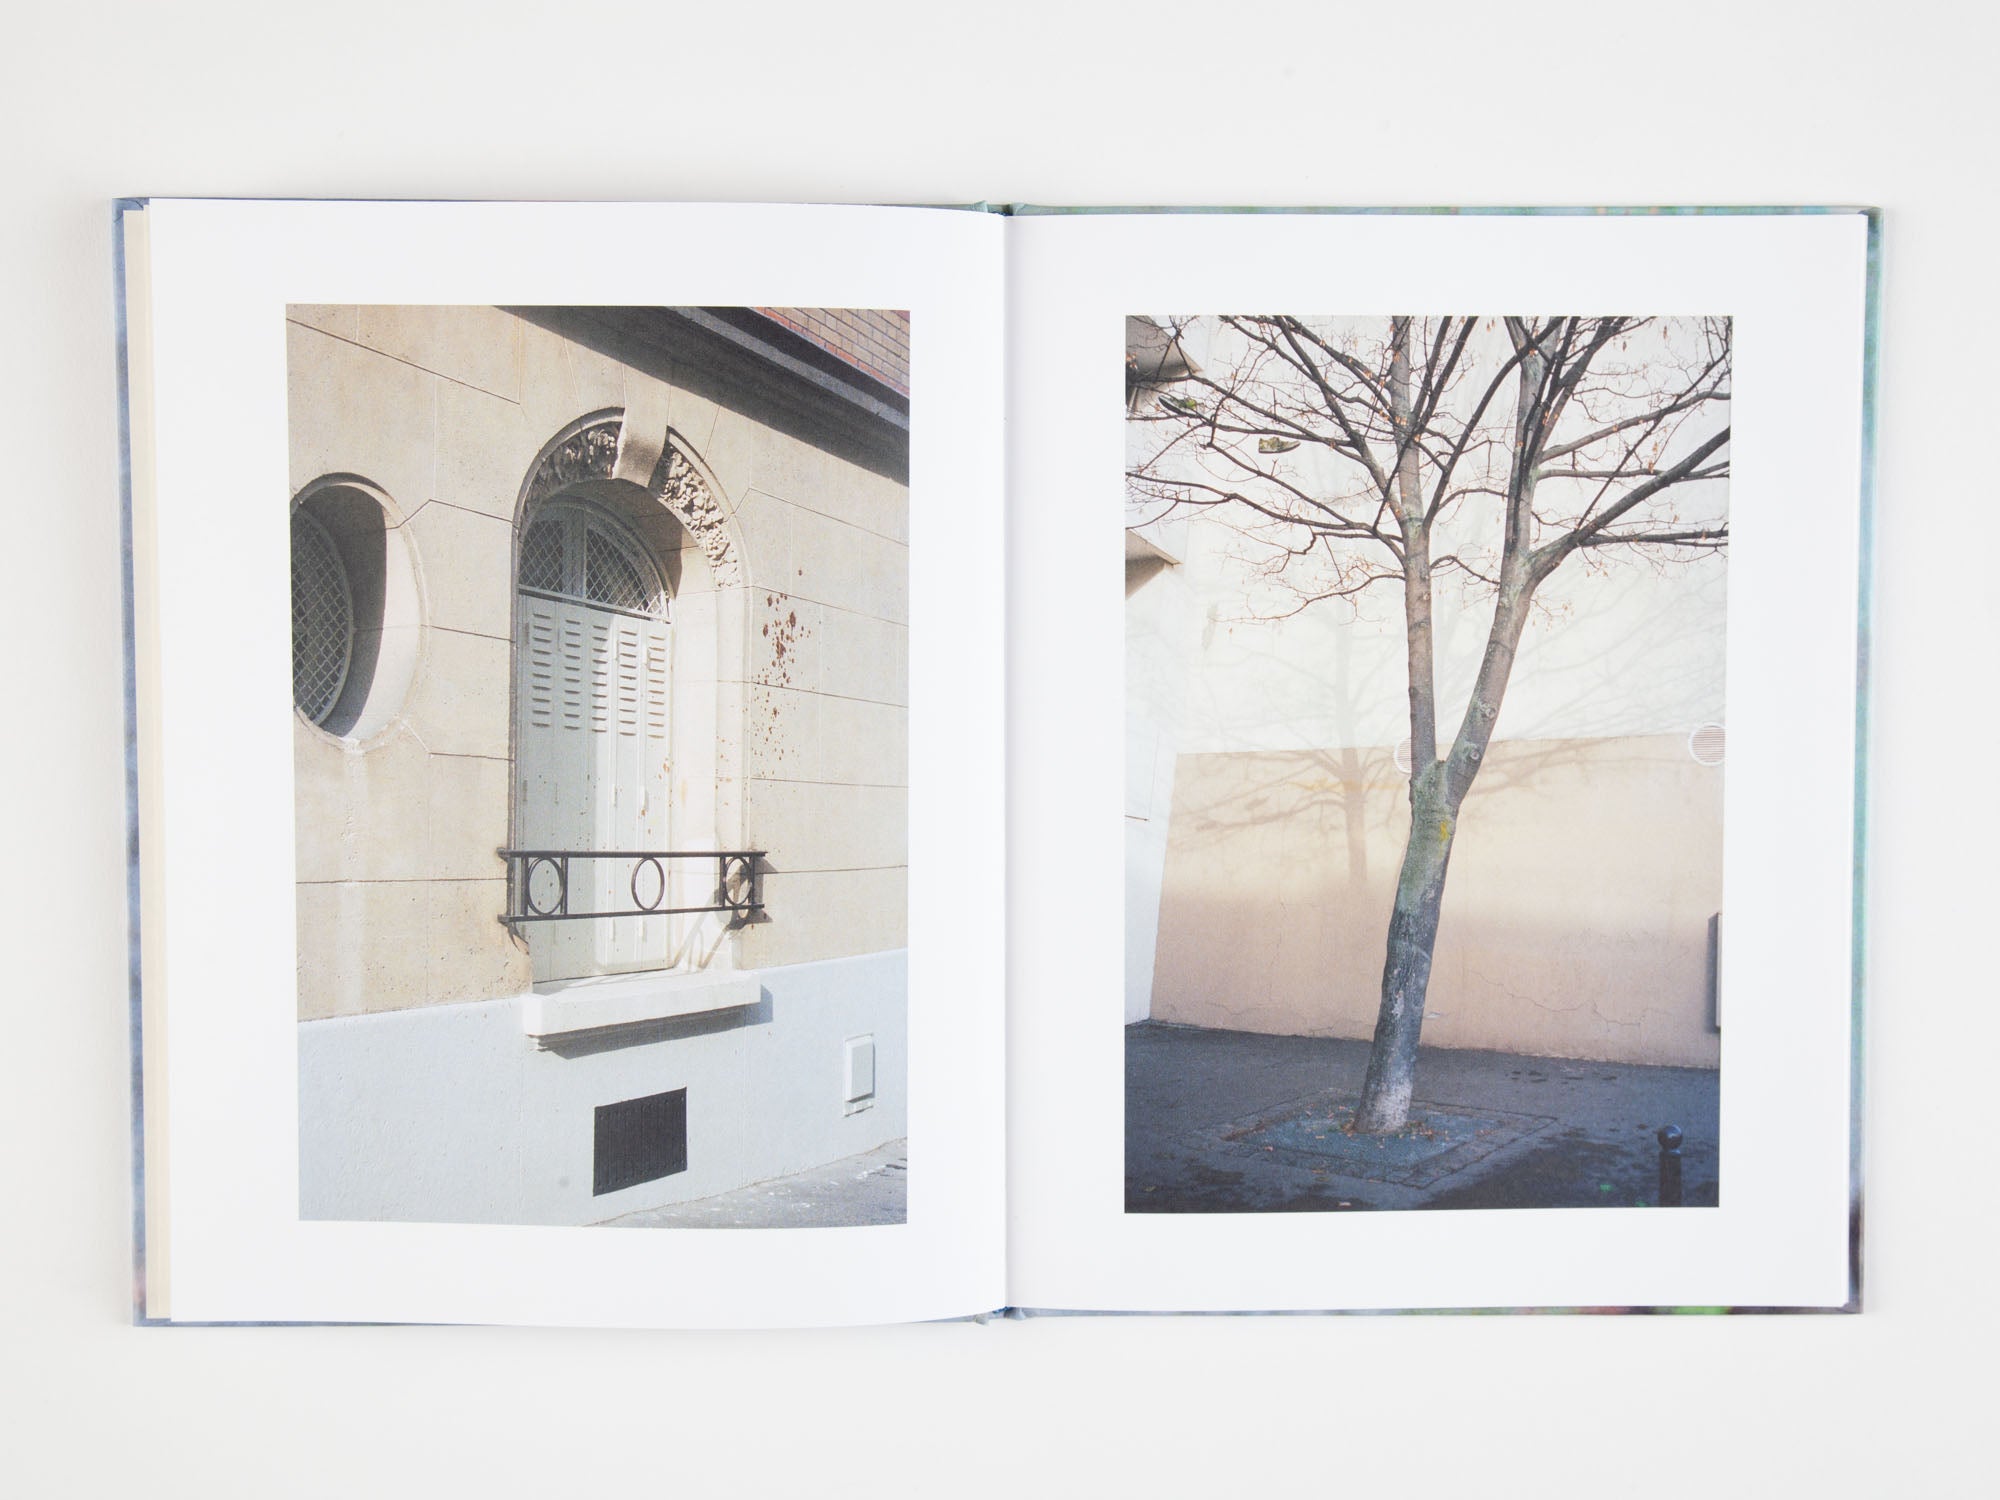 Notes on Ordinary Spaces by Ola Rindal – Citizen Editions